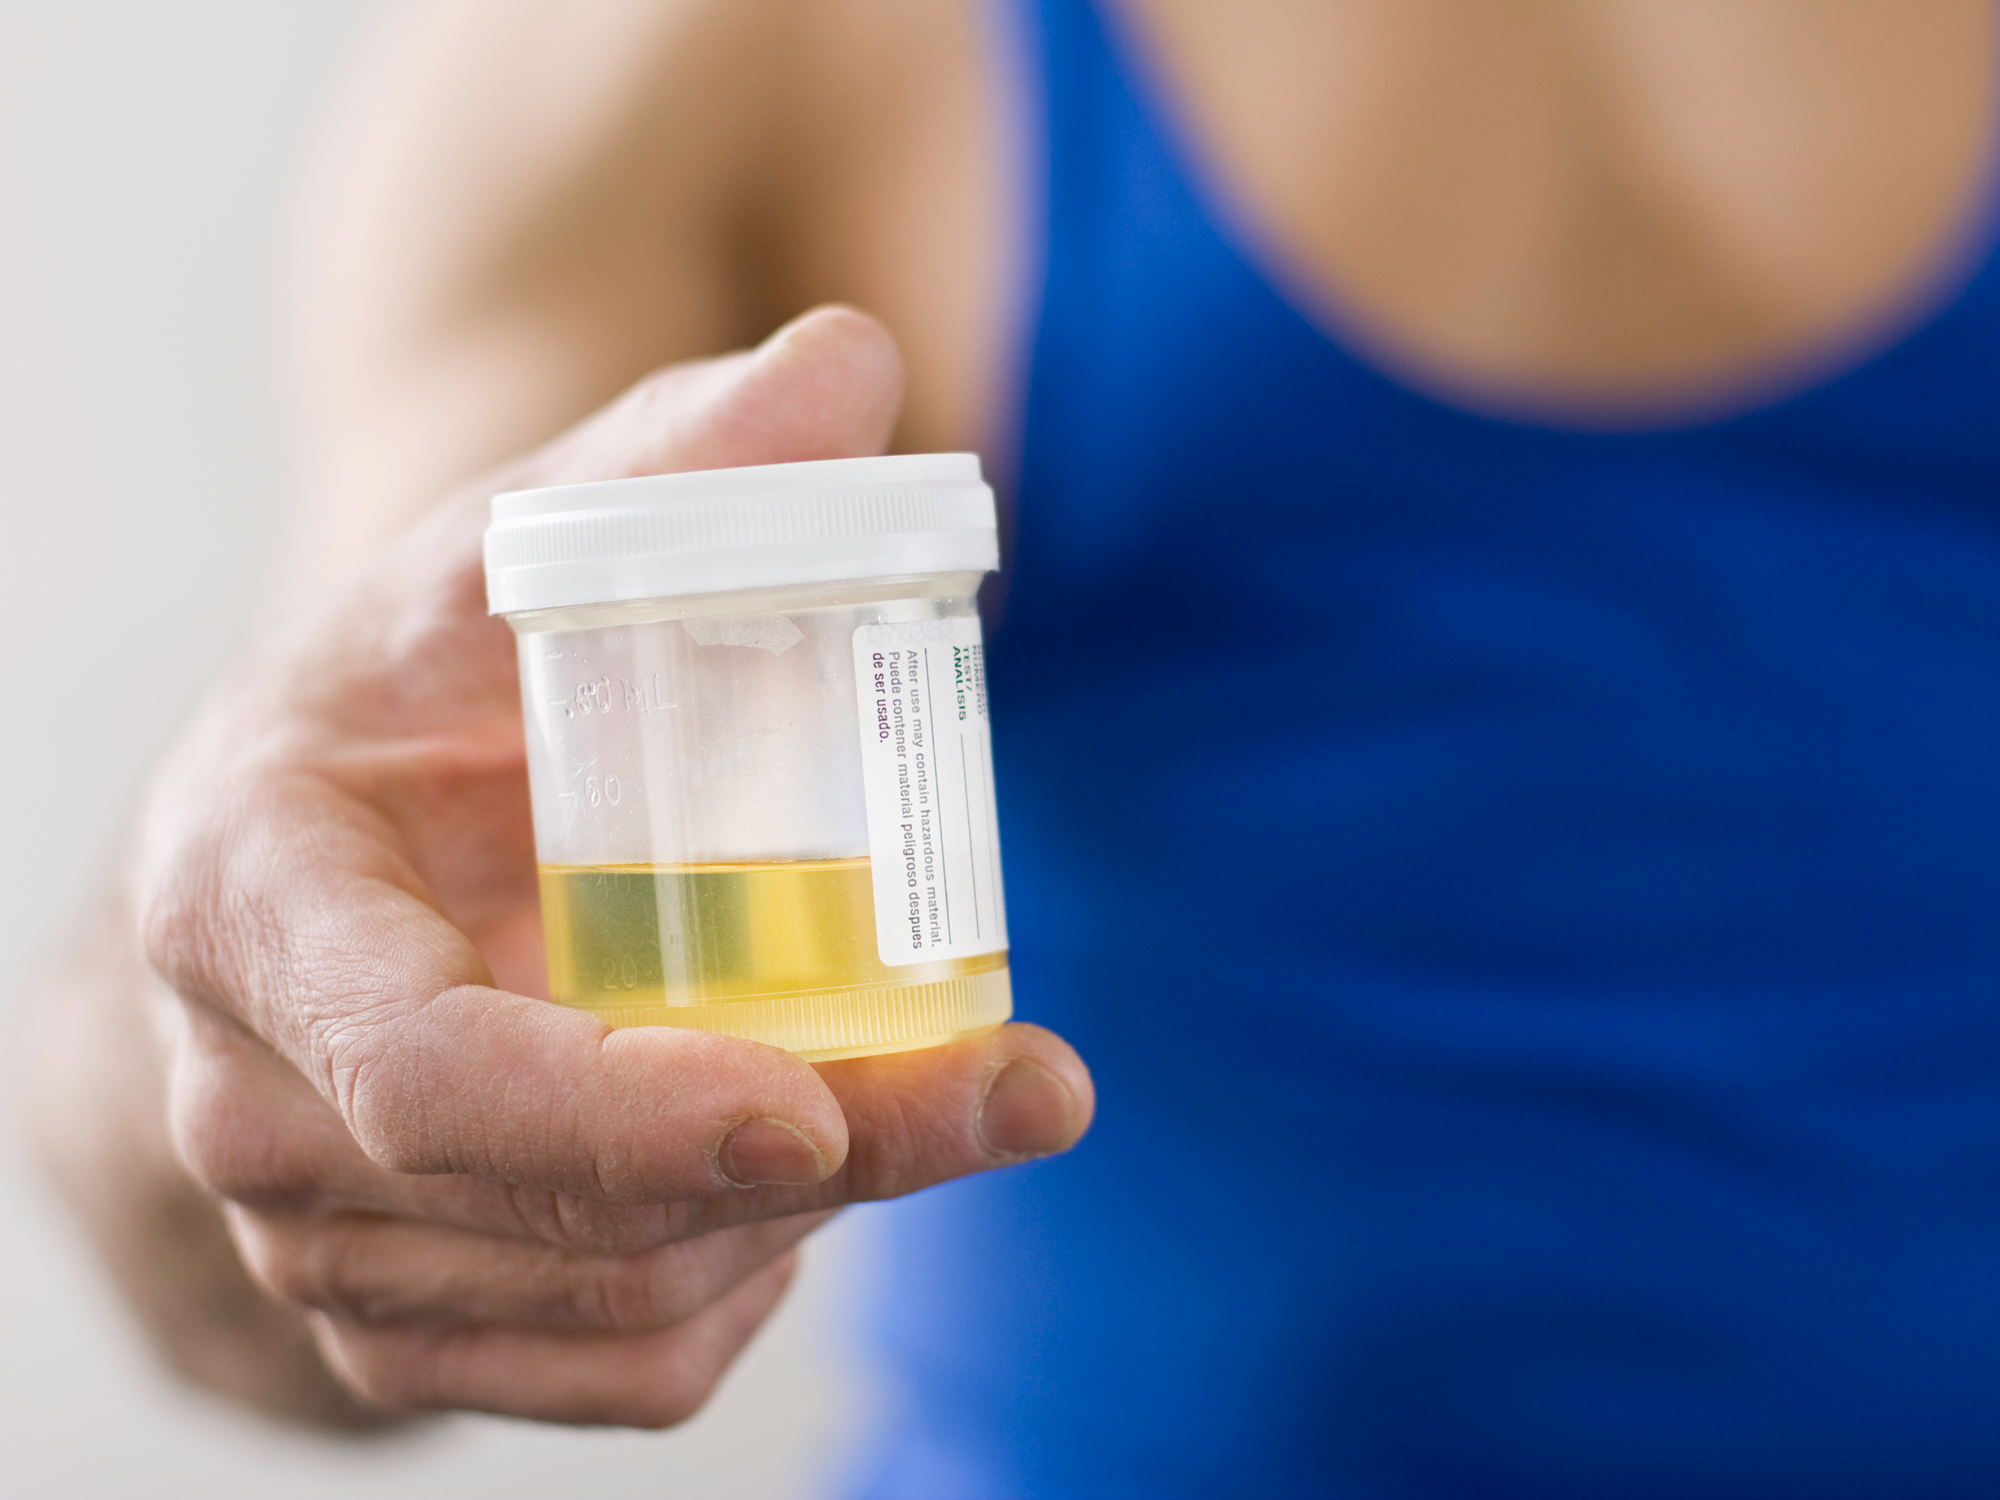 How you could get a superbug from an unnecessary urine test